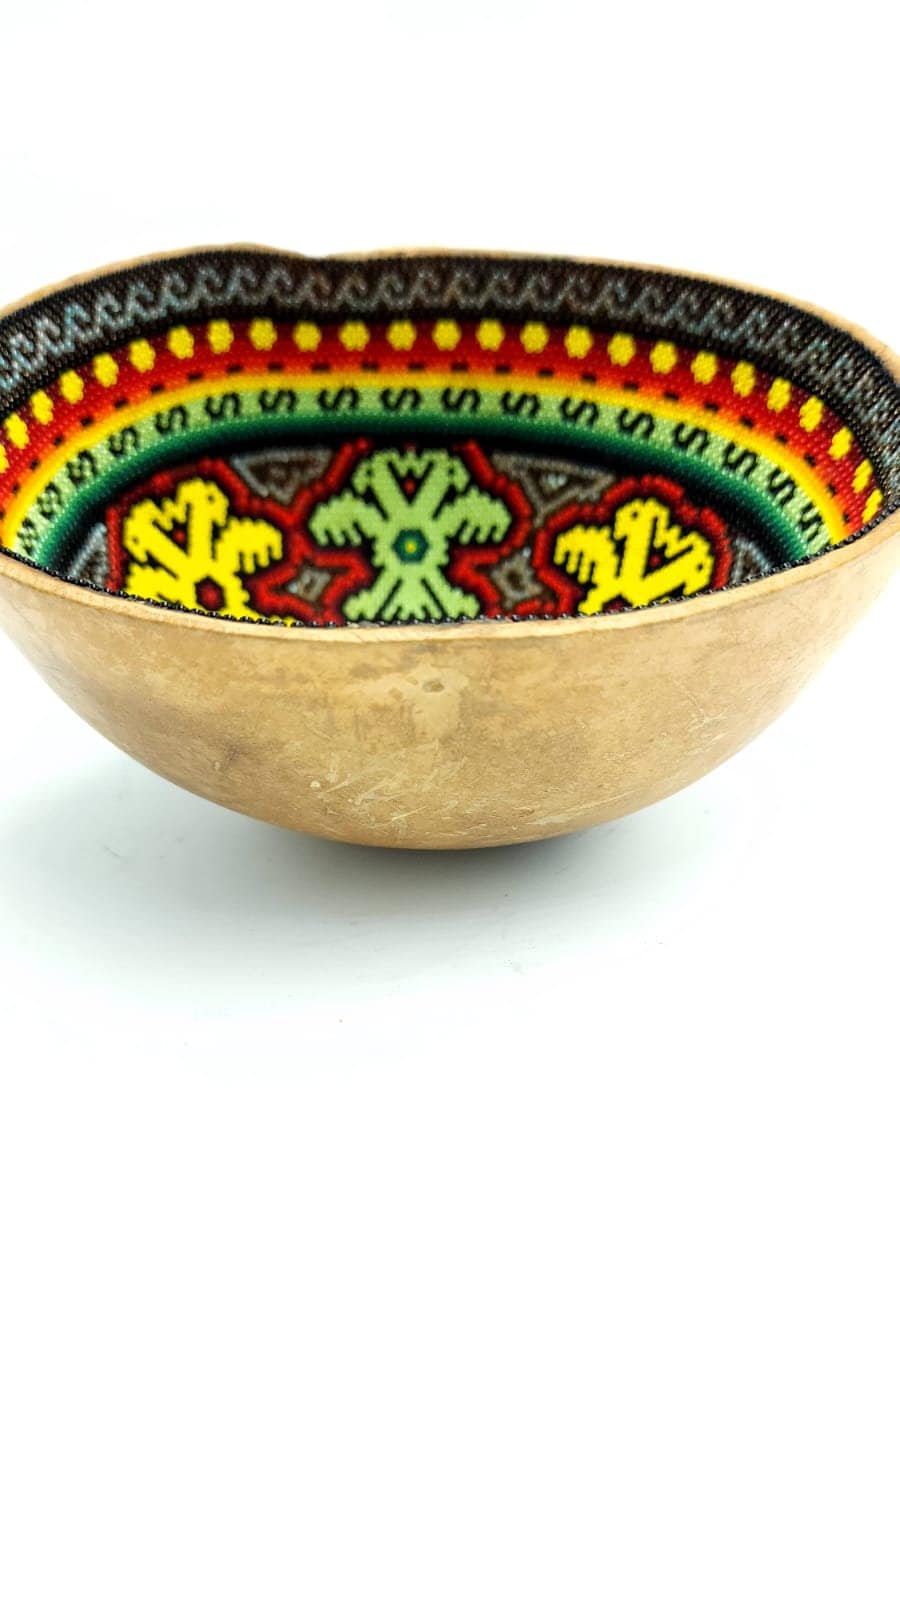 Hand Beaded Gourd Bowl Using Glass Beads By Santos Bautista PP4802